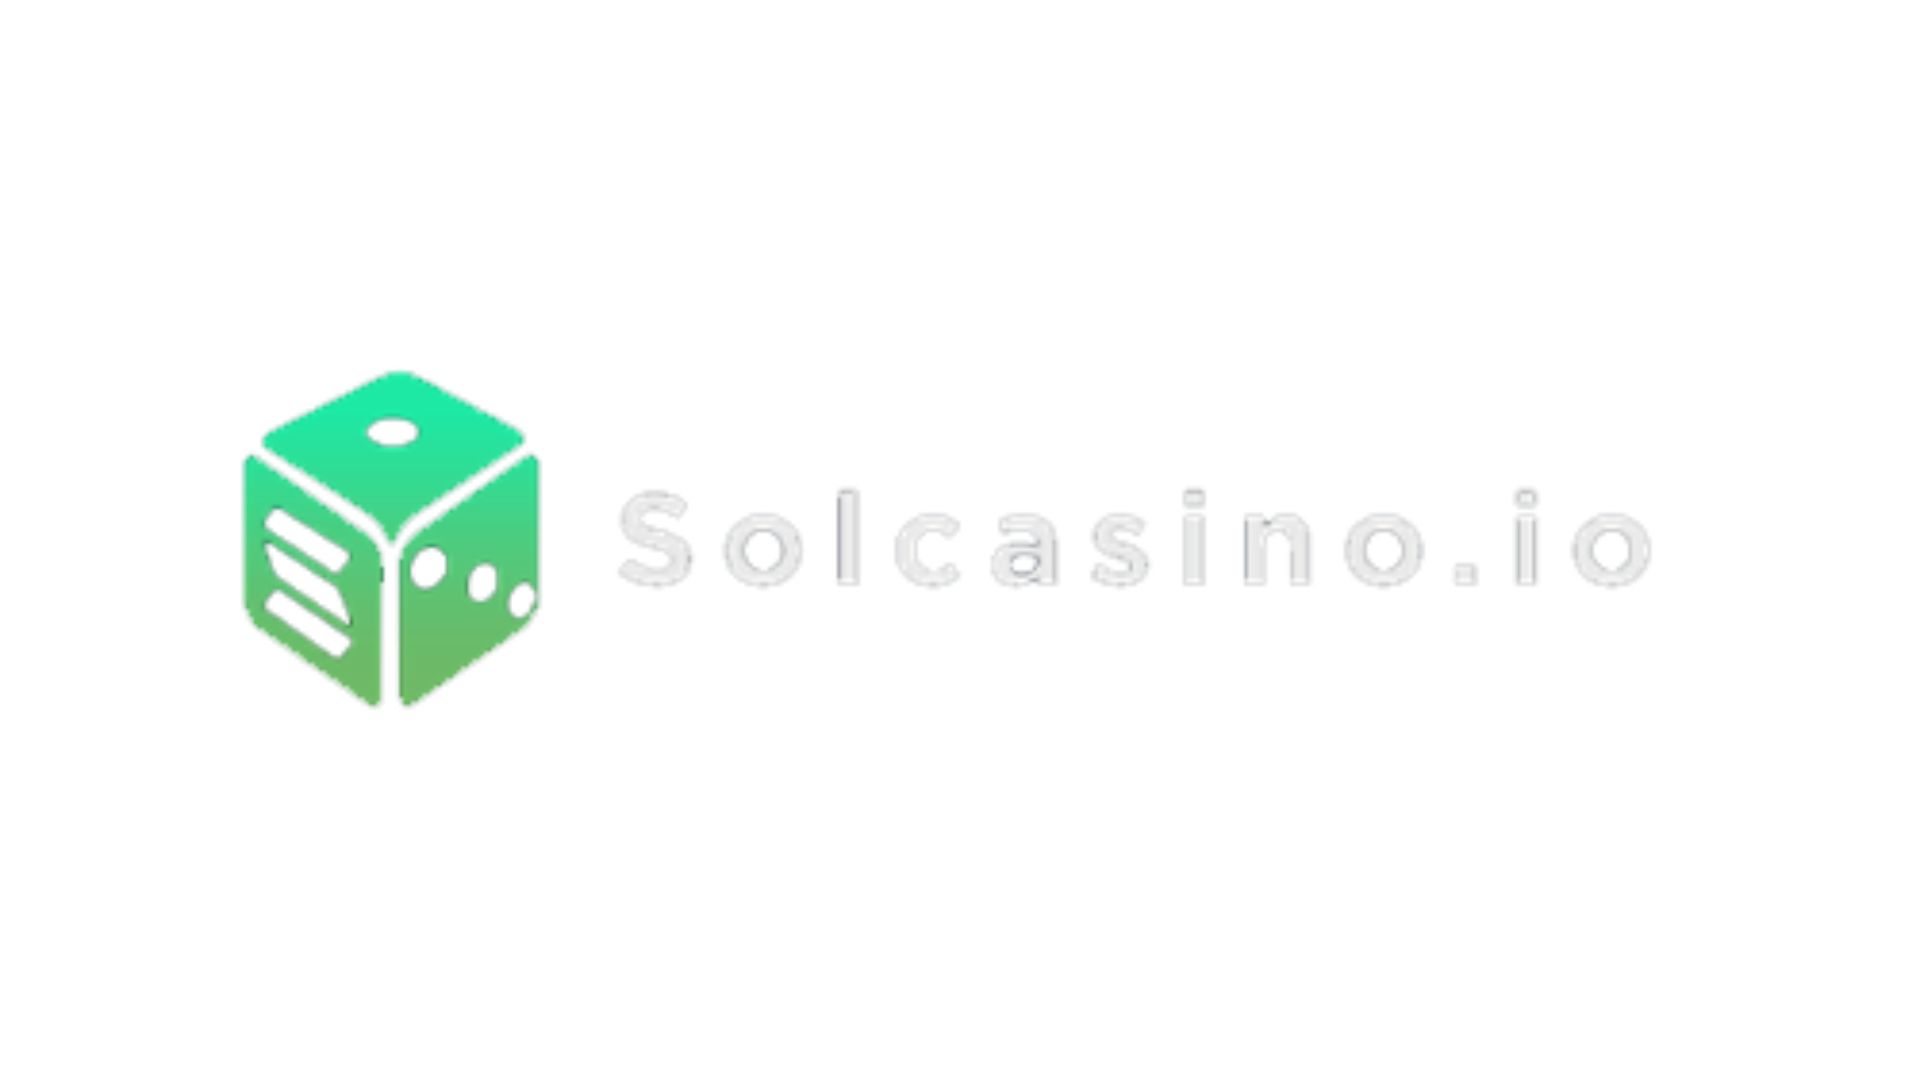 Solcasino Token Price Forecast: SCS Pumps 145% In A Week, But Crypto Experts Rave About This Telegram Casino With Explosive Potential